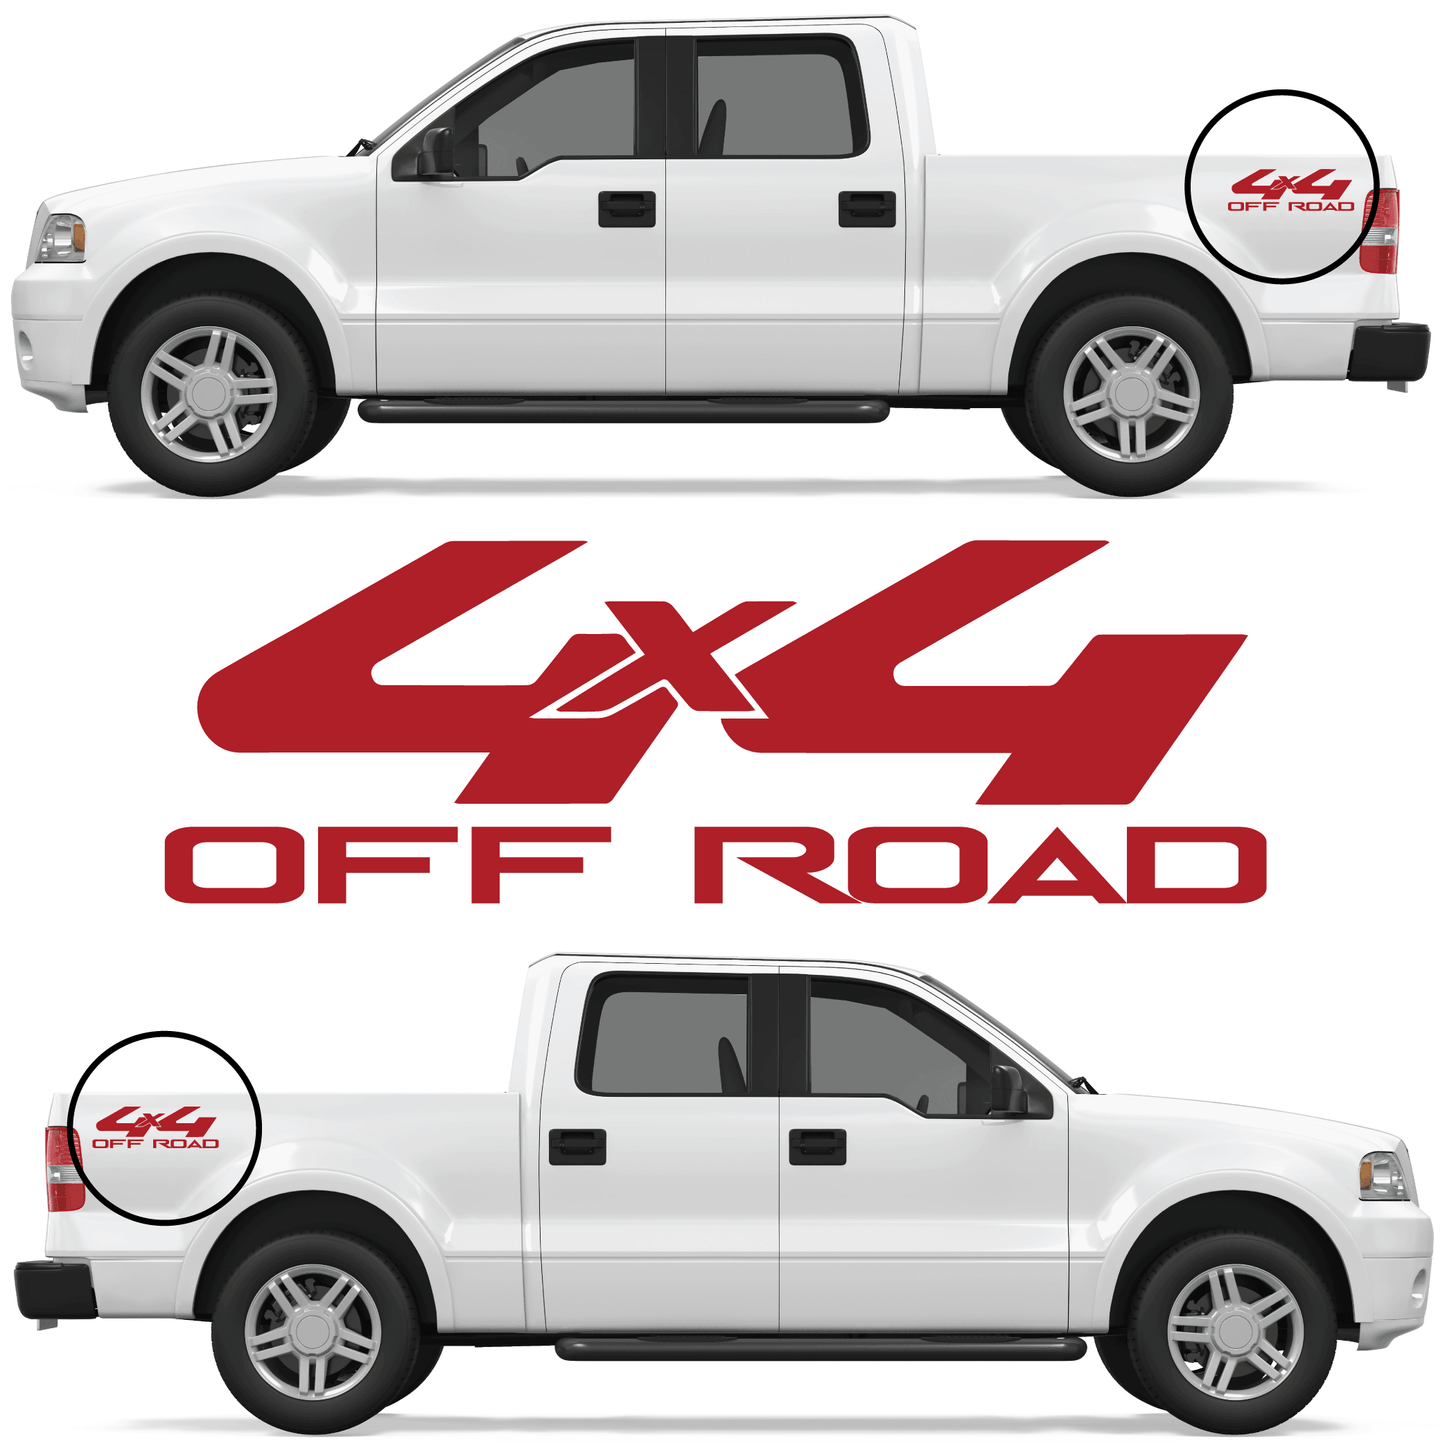 Shop Vinyl Design F-150 F-250 Trucks 4 x 4 Off Road Replacement Bedside Decals #20 Vehicle decal 001 Red Gloss Shop Vinyl Design decals stickers